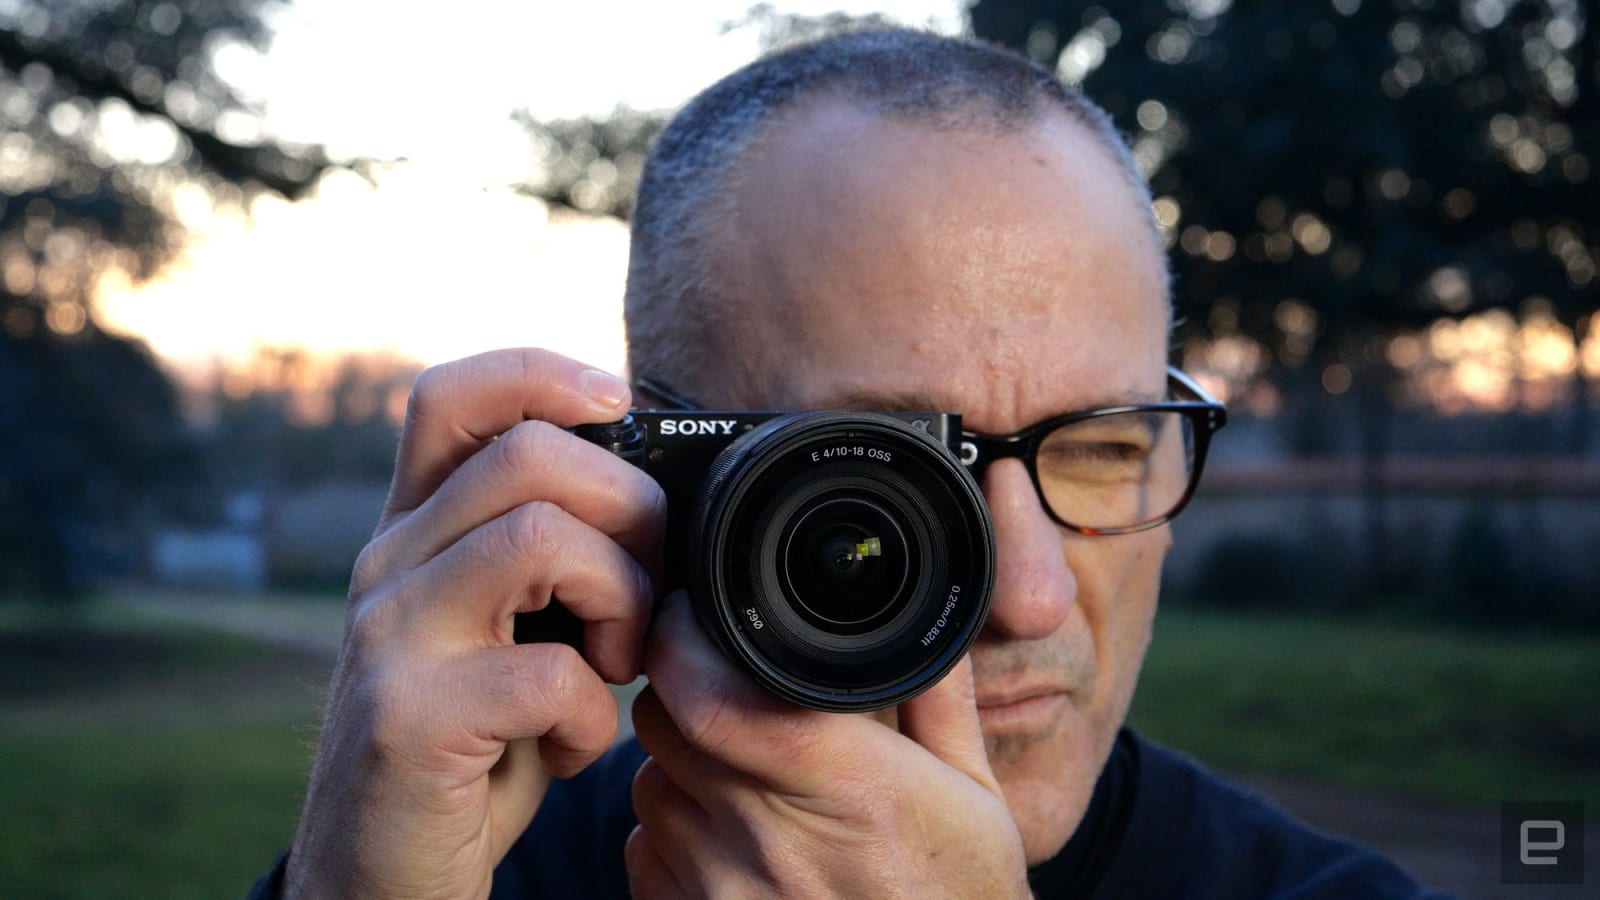 Sony A6100 mirrorless camera review